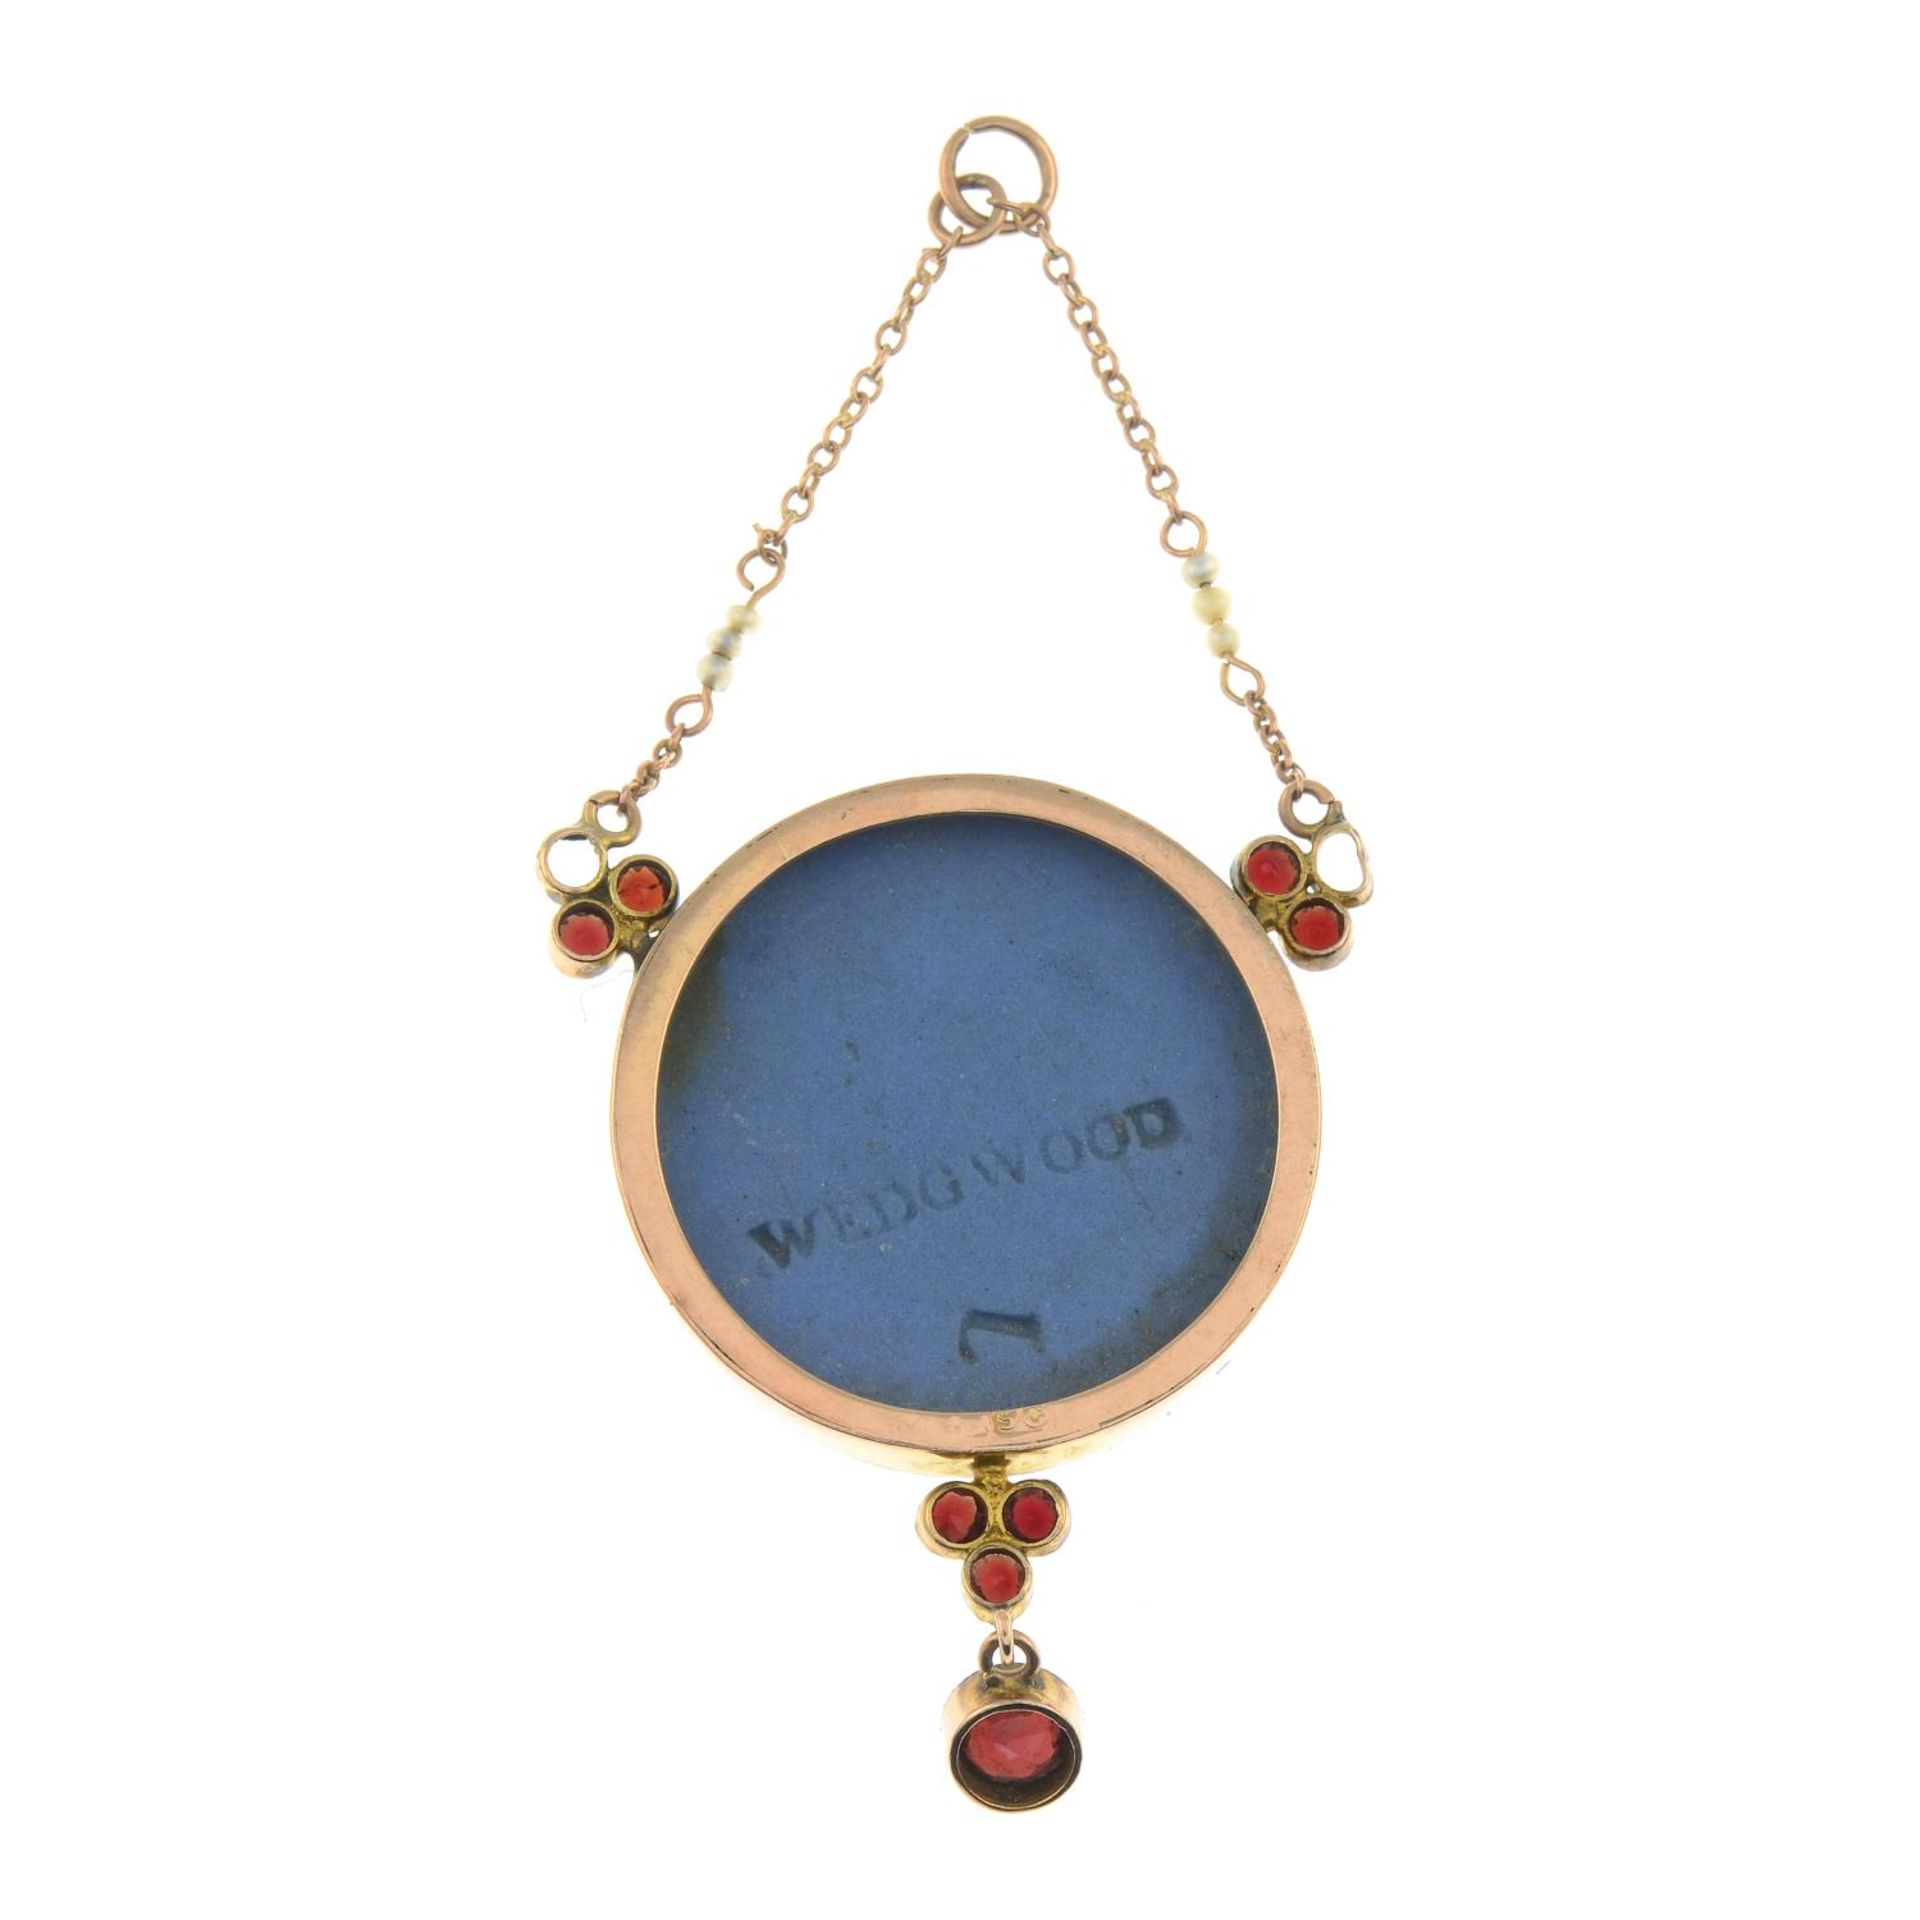 A 9ct gold Wedgwood cameo pendant with garnet and seed pearl detail.Signed Wedgwood. - Image 2 of 2